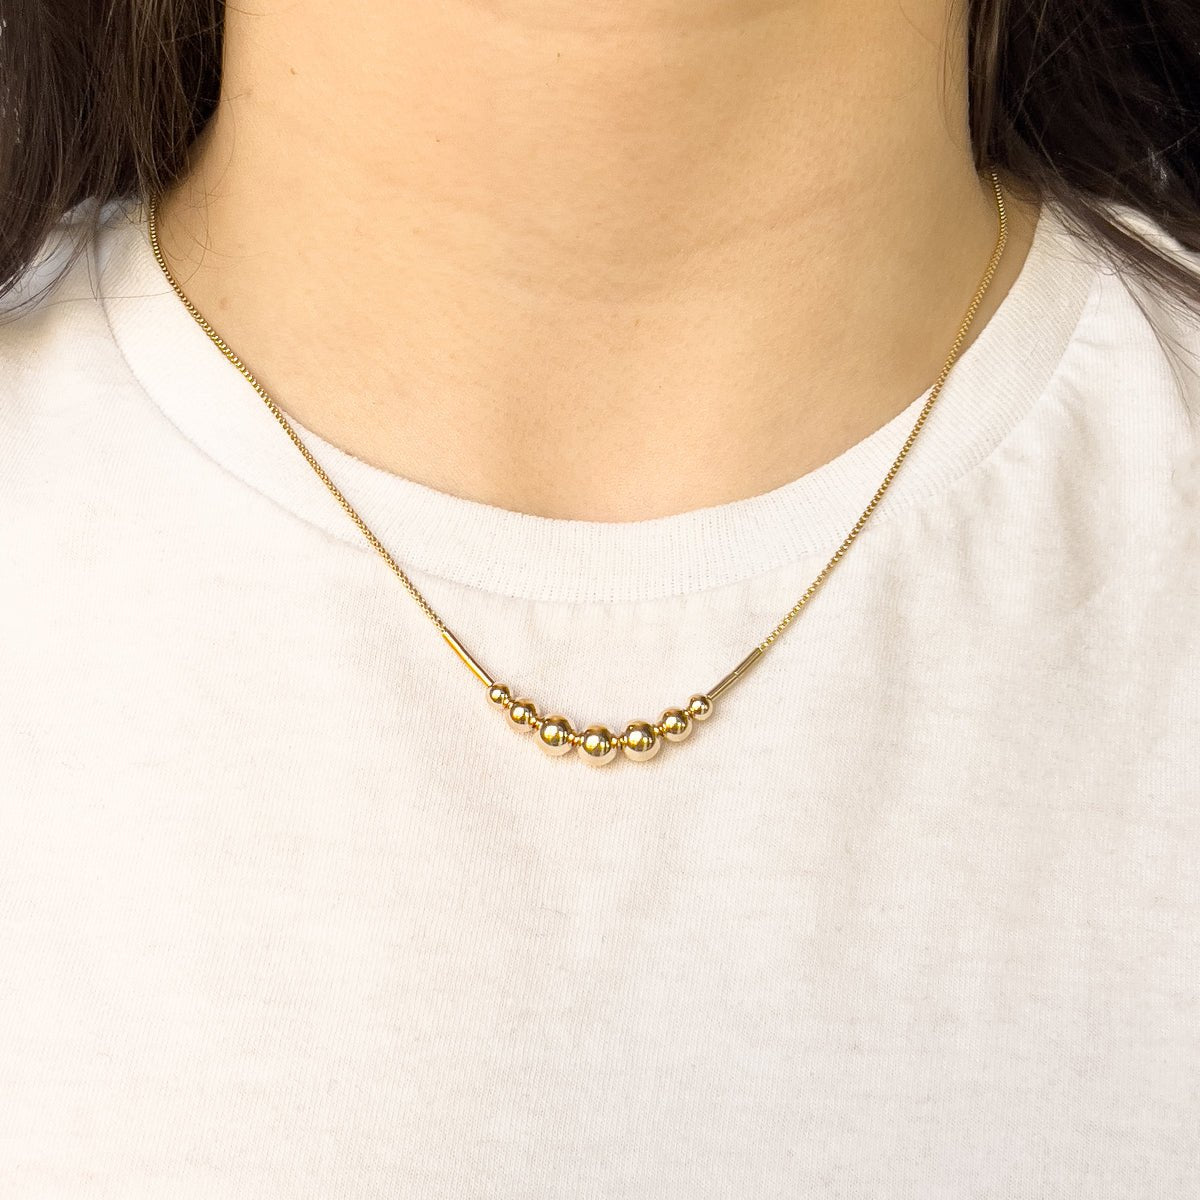 A model wears a gold fill necklace featuring a delicate chain and seven round beads flanked by narrow tube beads. The Strella Necklace is designed and handcrafted in Portland, Oregon.